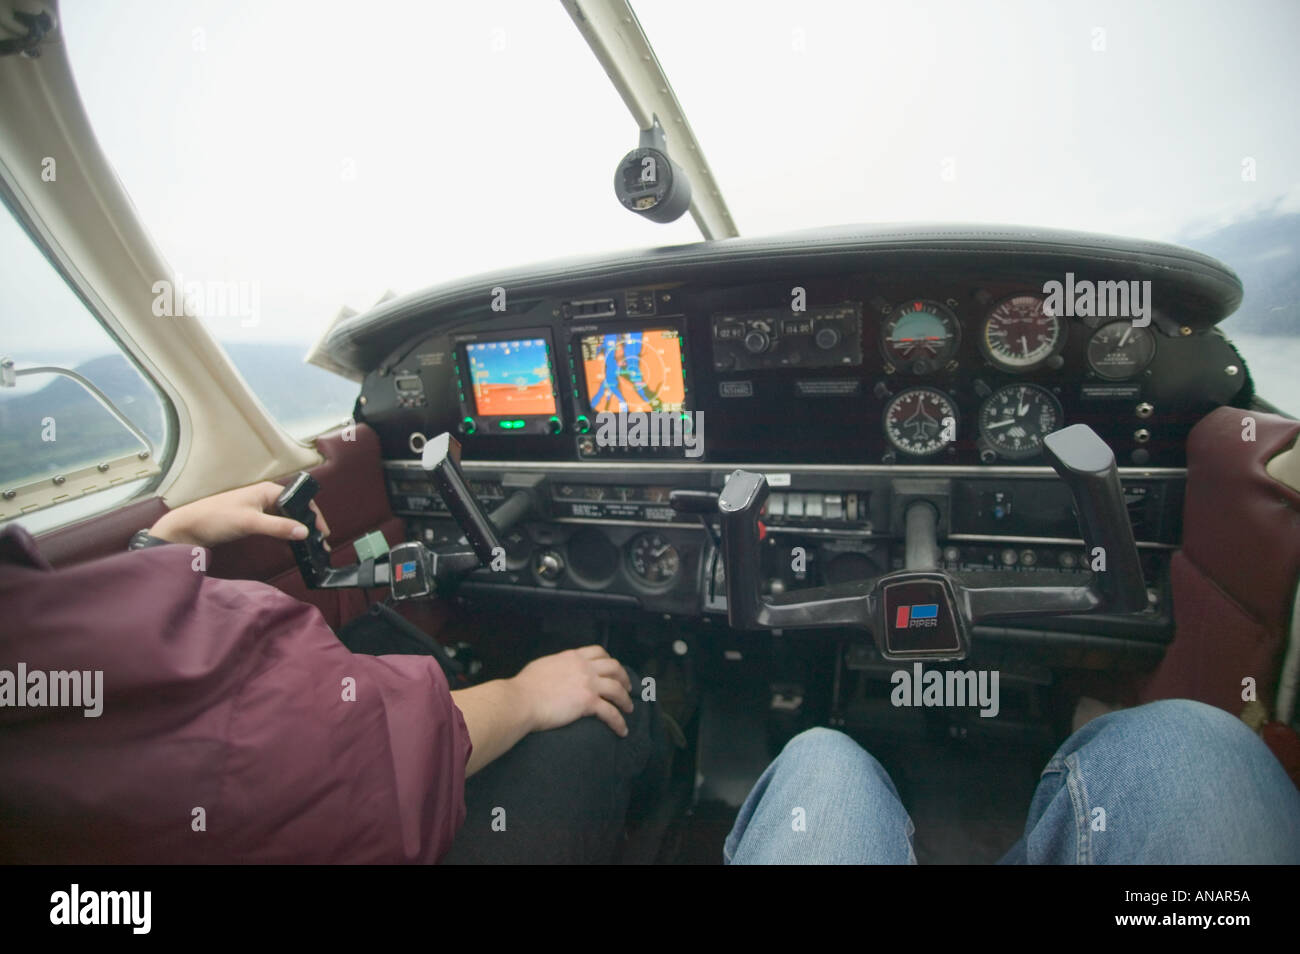 Pilot At The Helm Of An Airplane Stock Photos & Pilot At The Helm ...